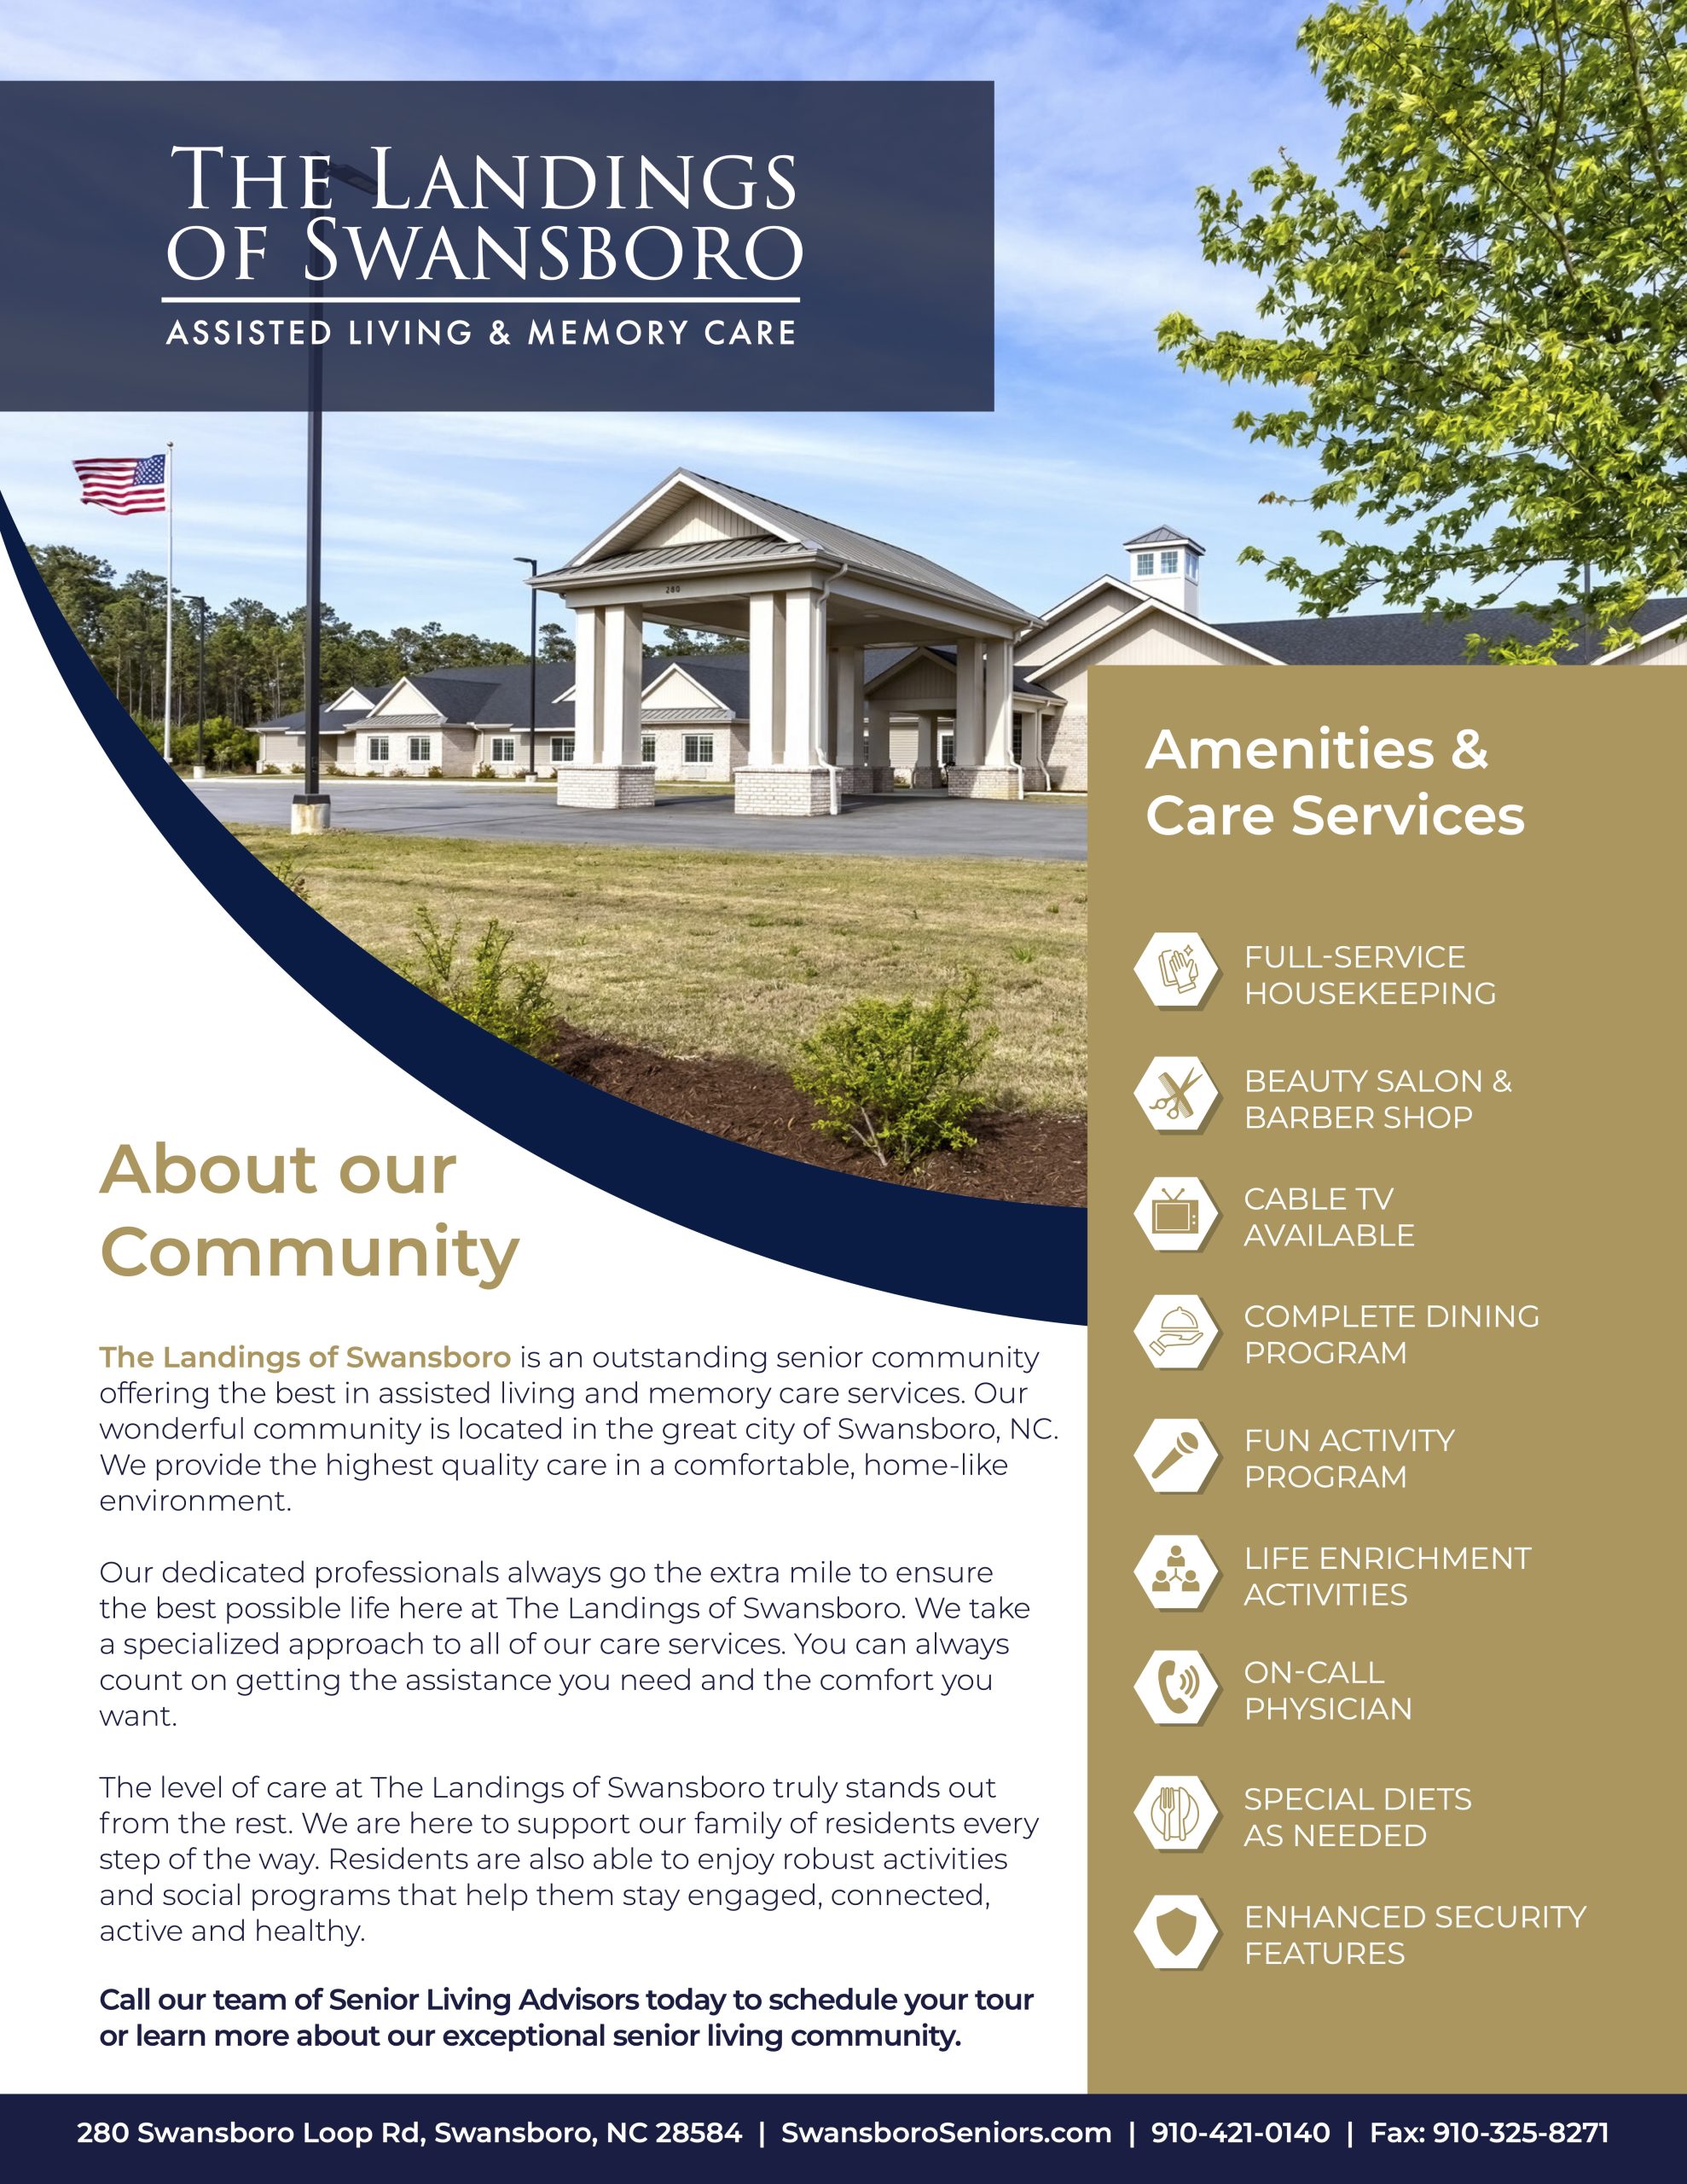 TLO Swansboro- About our Services